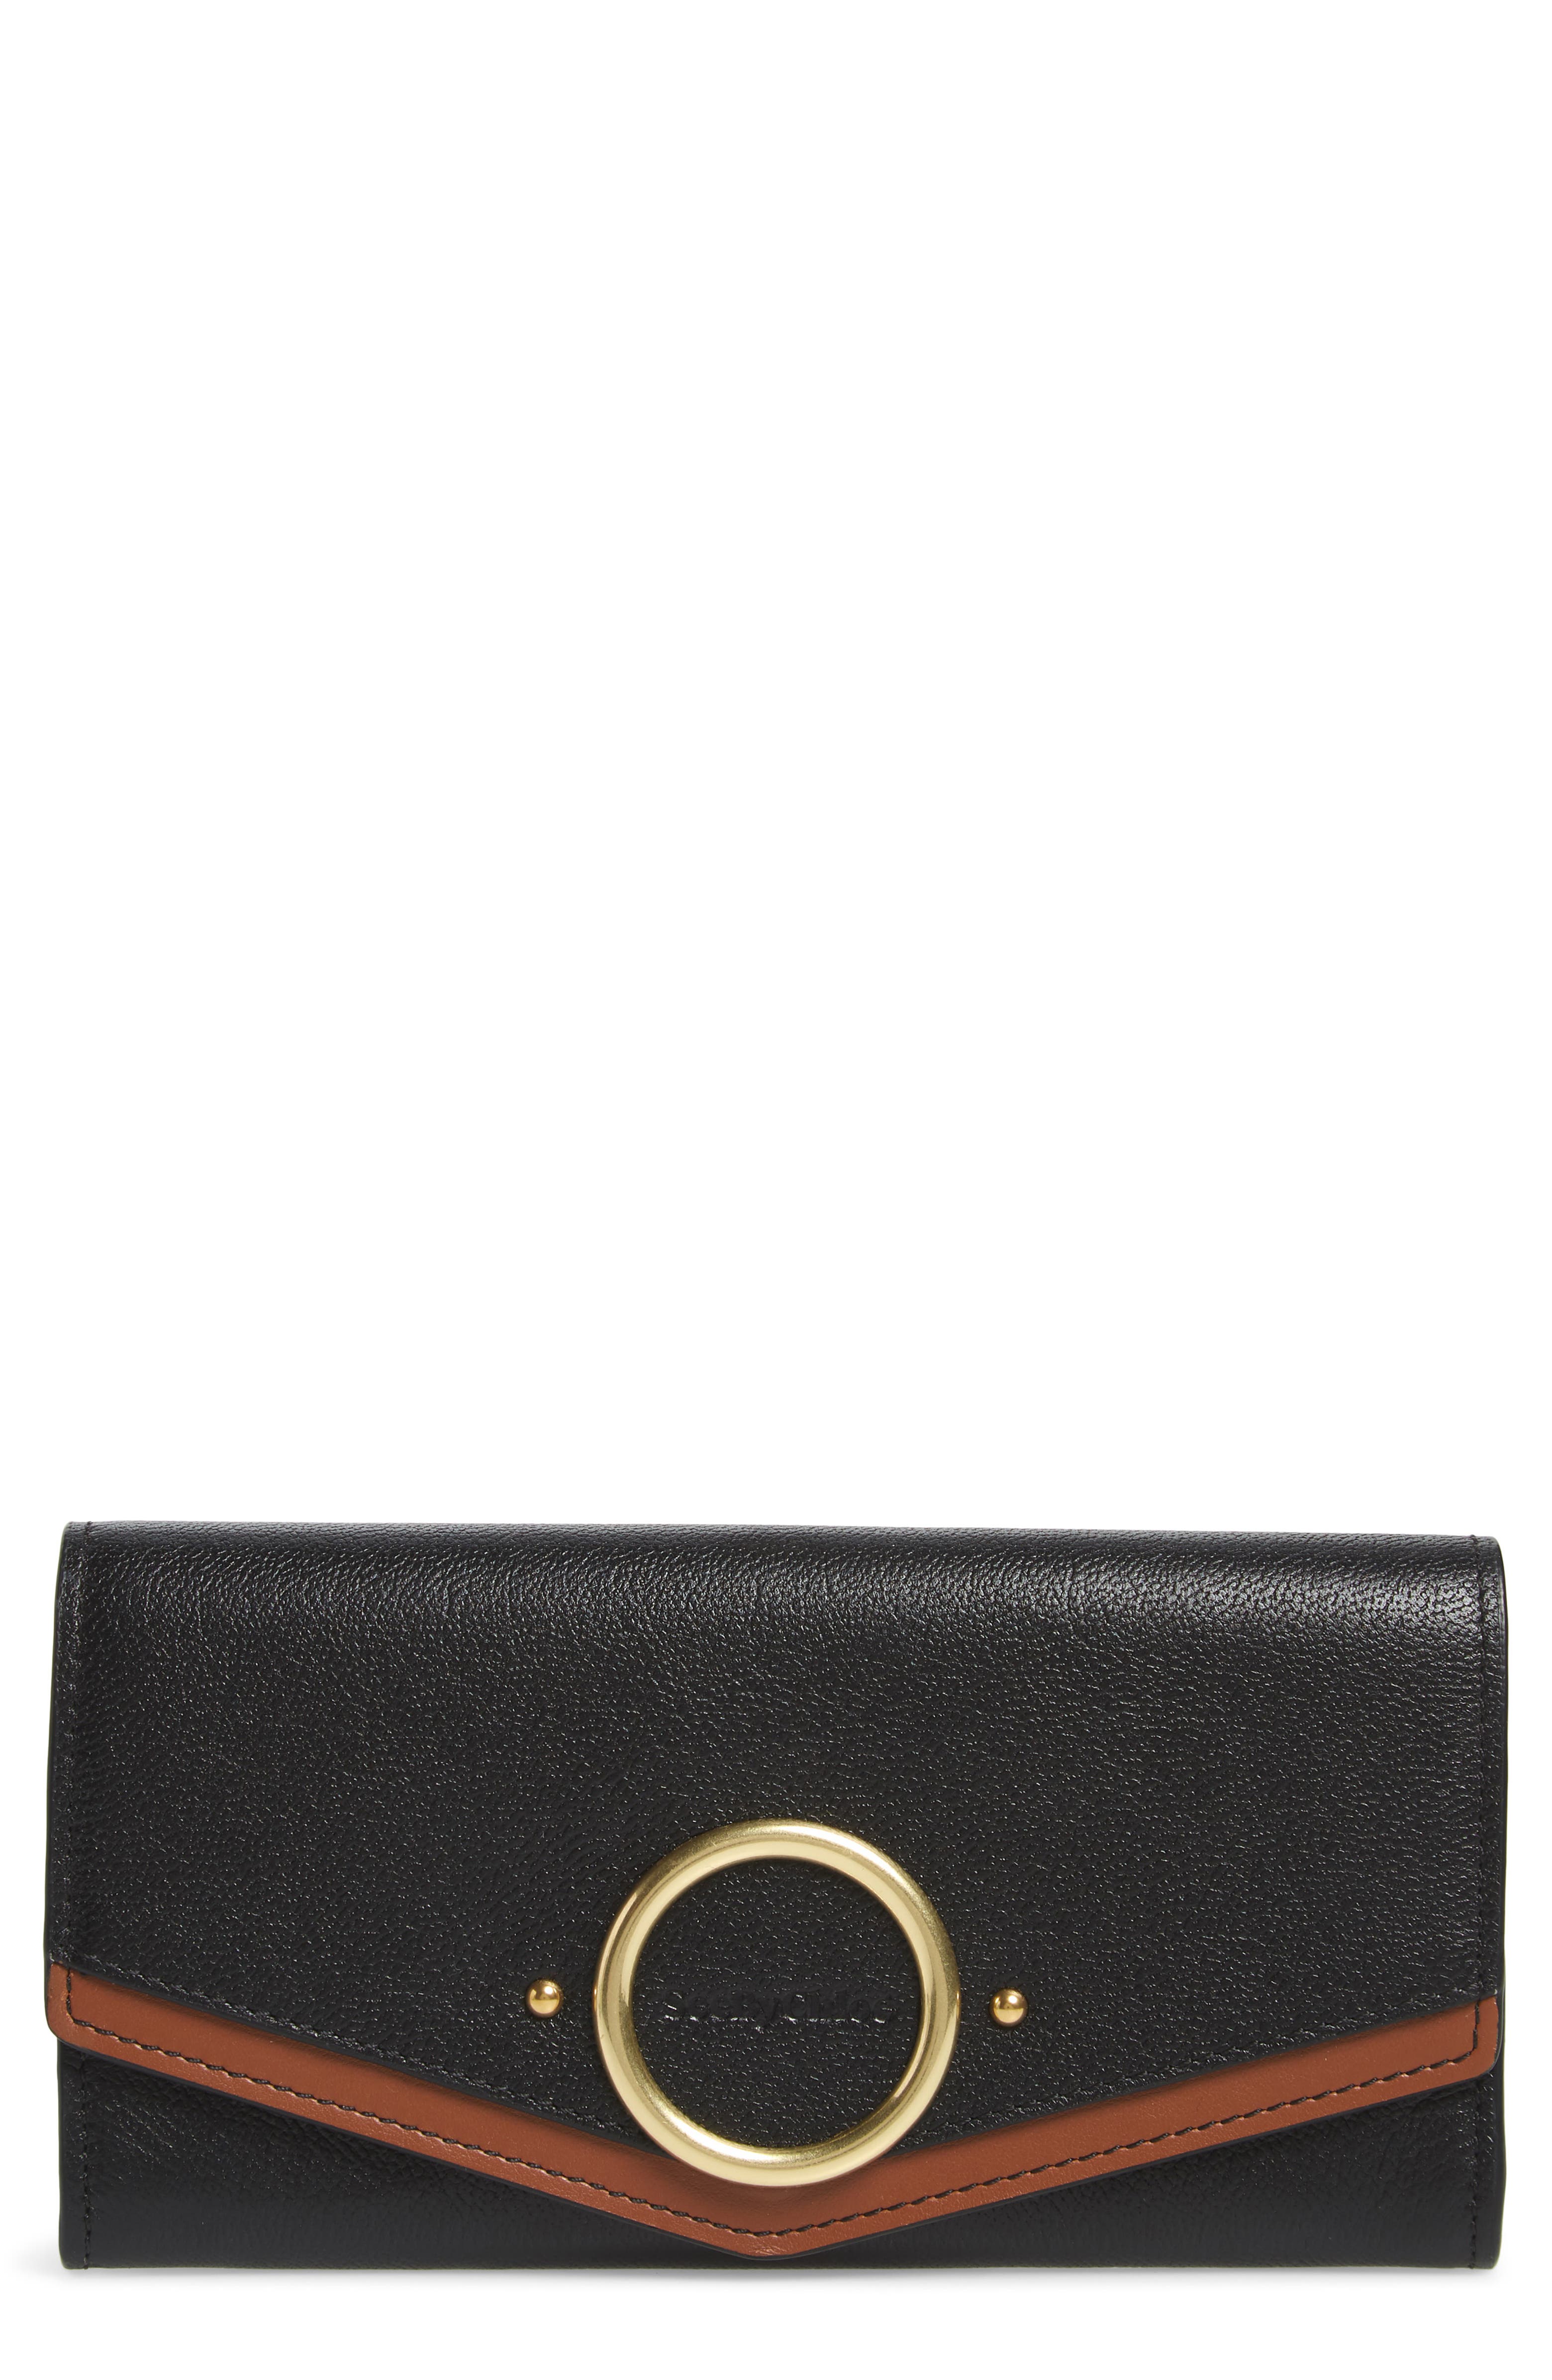 See by Chloé Large Aura Leather Wallet | Nordstrom